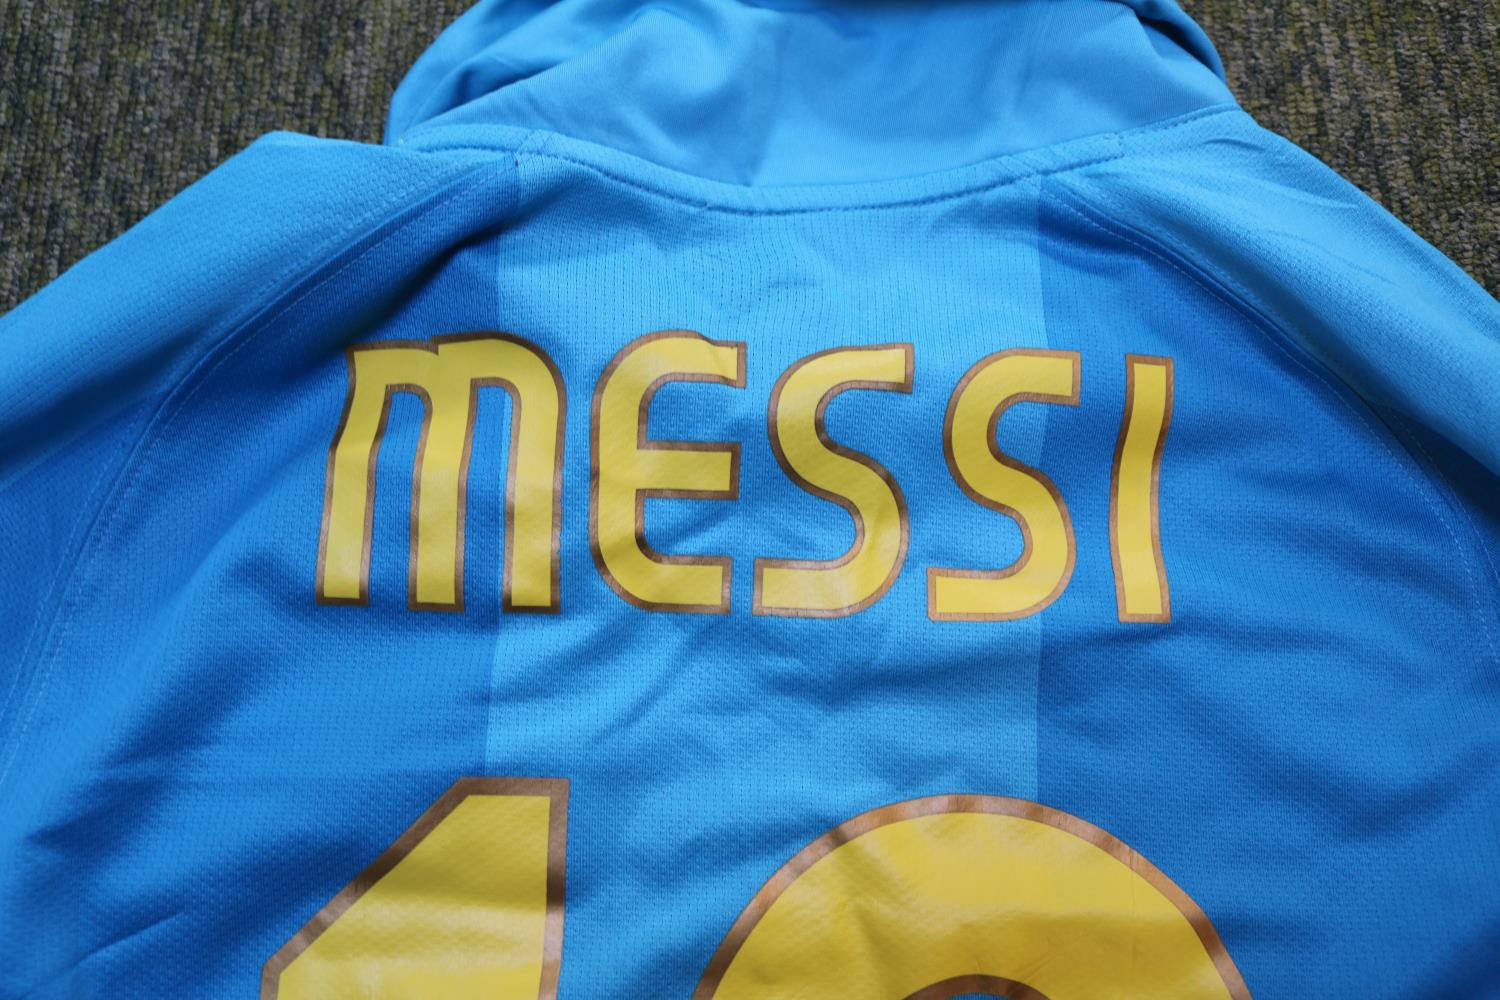 LIONEL MESSI 2008/2009 MATCH WORN #19 BARCELONA AWAY JERSEY Lionel Messi wore this number "19" - Image 7 of 9